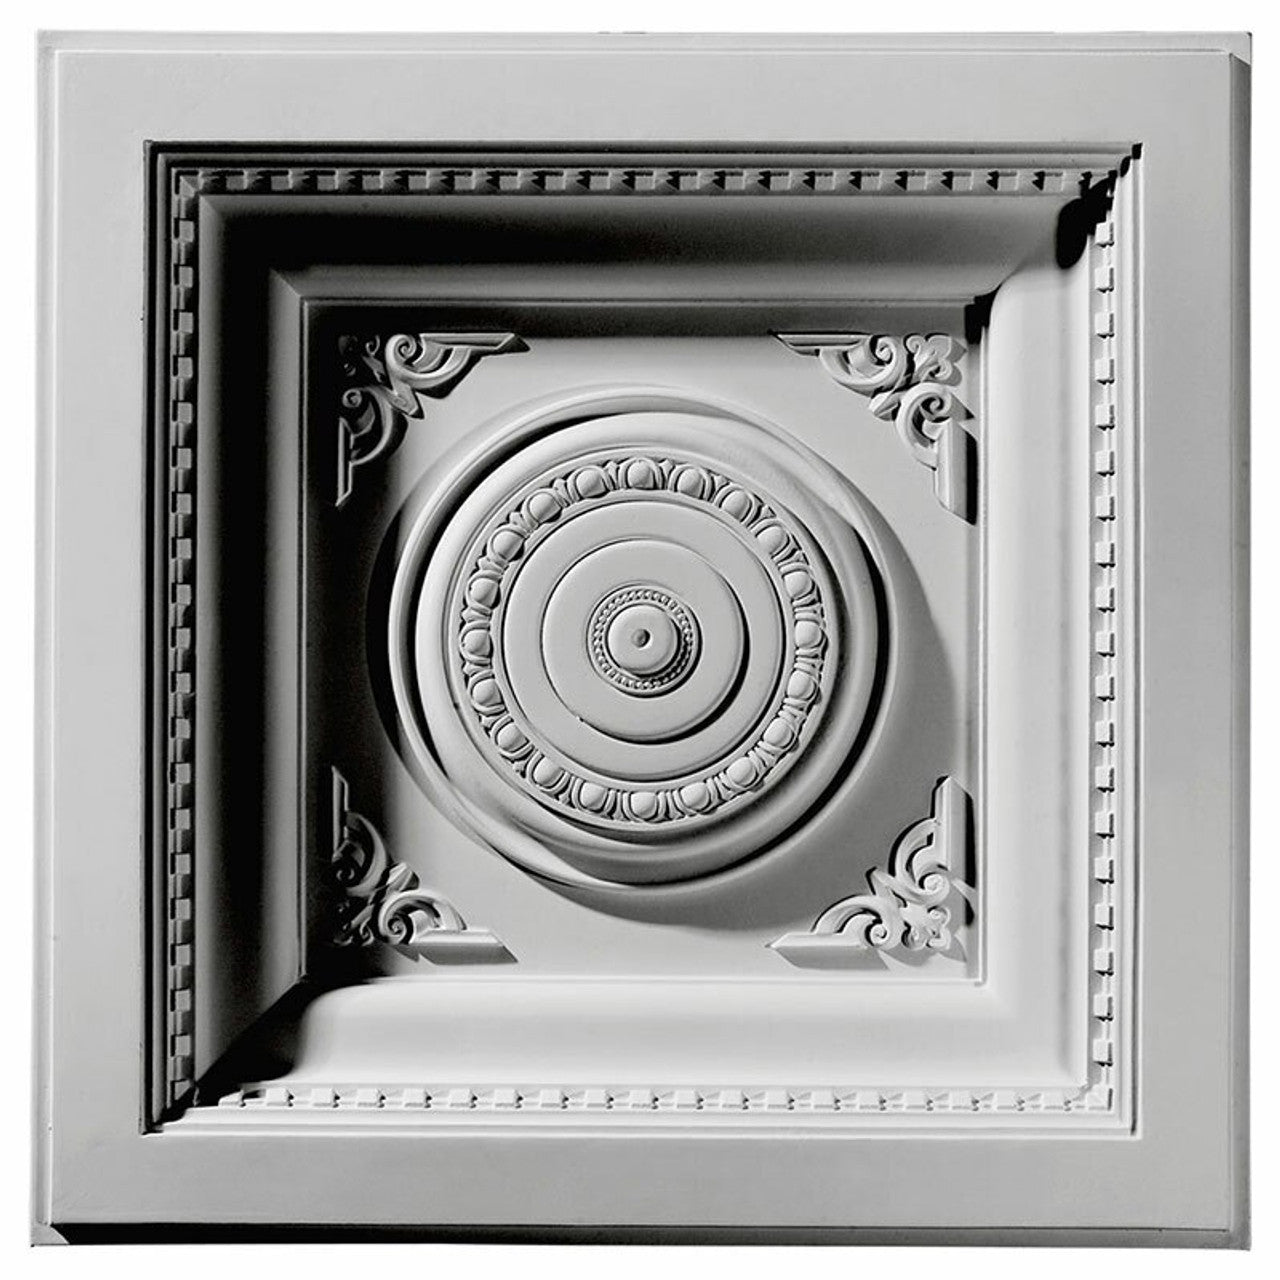 Royal - Urethane - Coffered Drop Ceiling Tile - 24"x24"